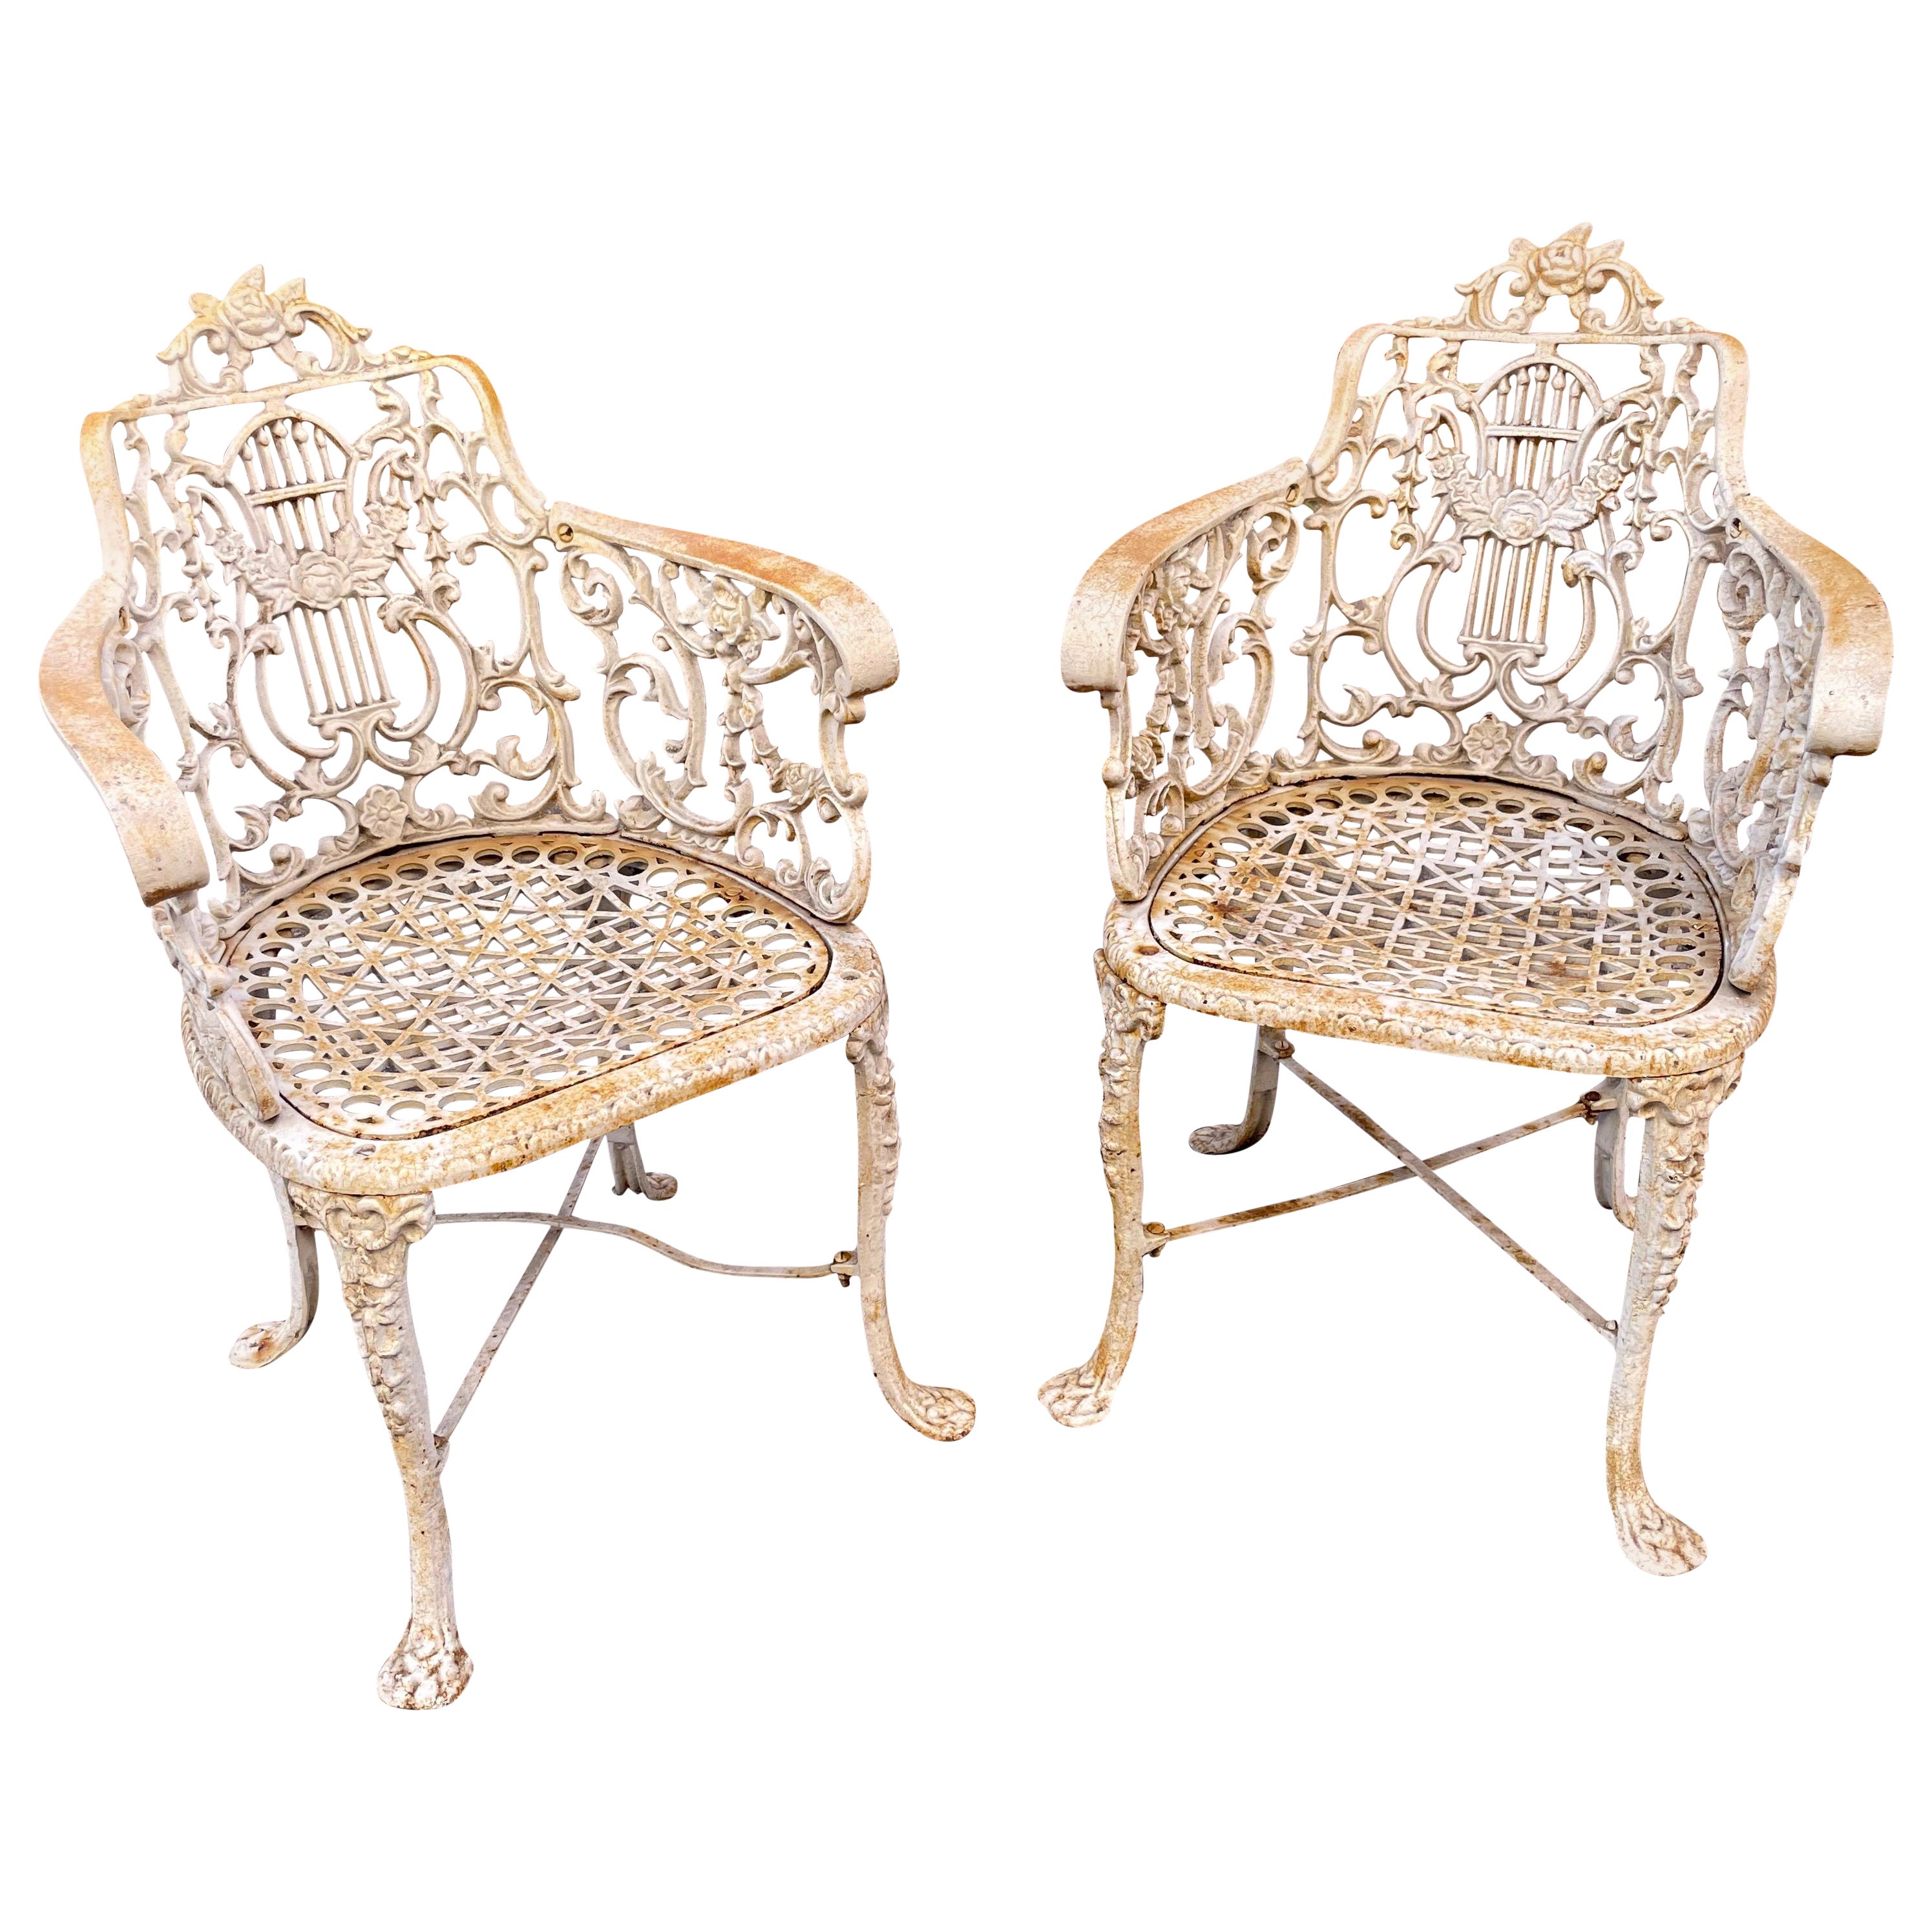 1860s Antique Neoclassical Robert Wood Cast Iron Chairs, a Pair For Sale